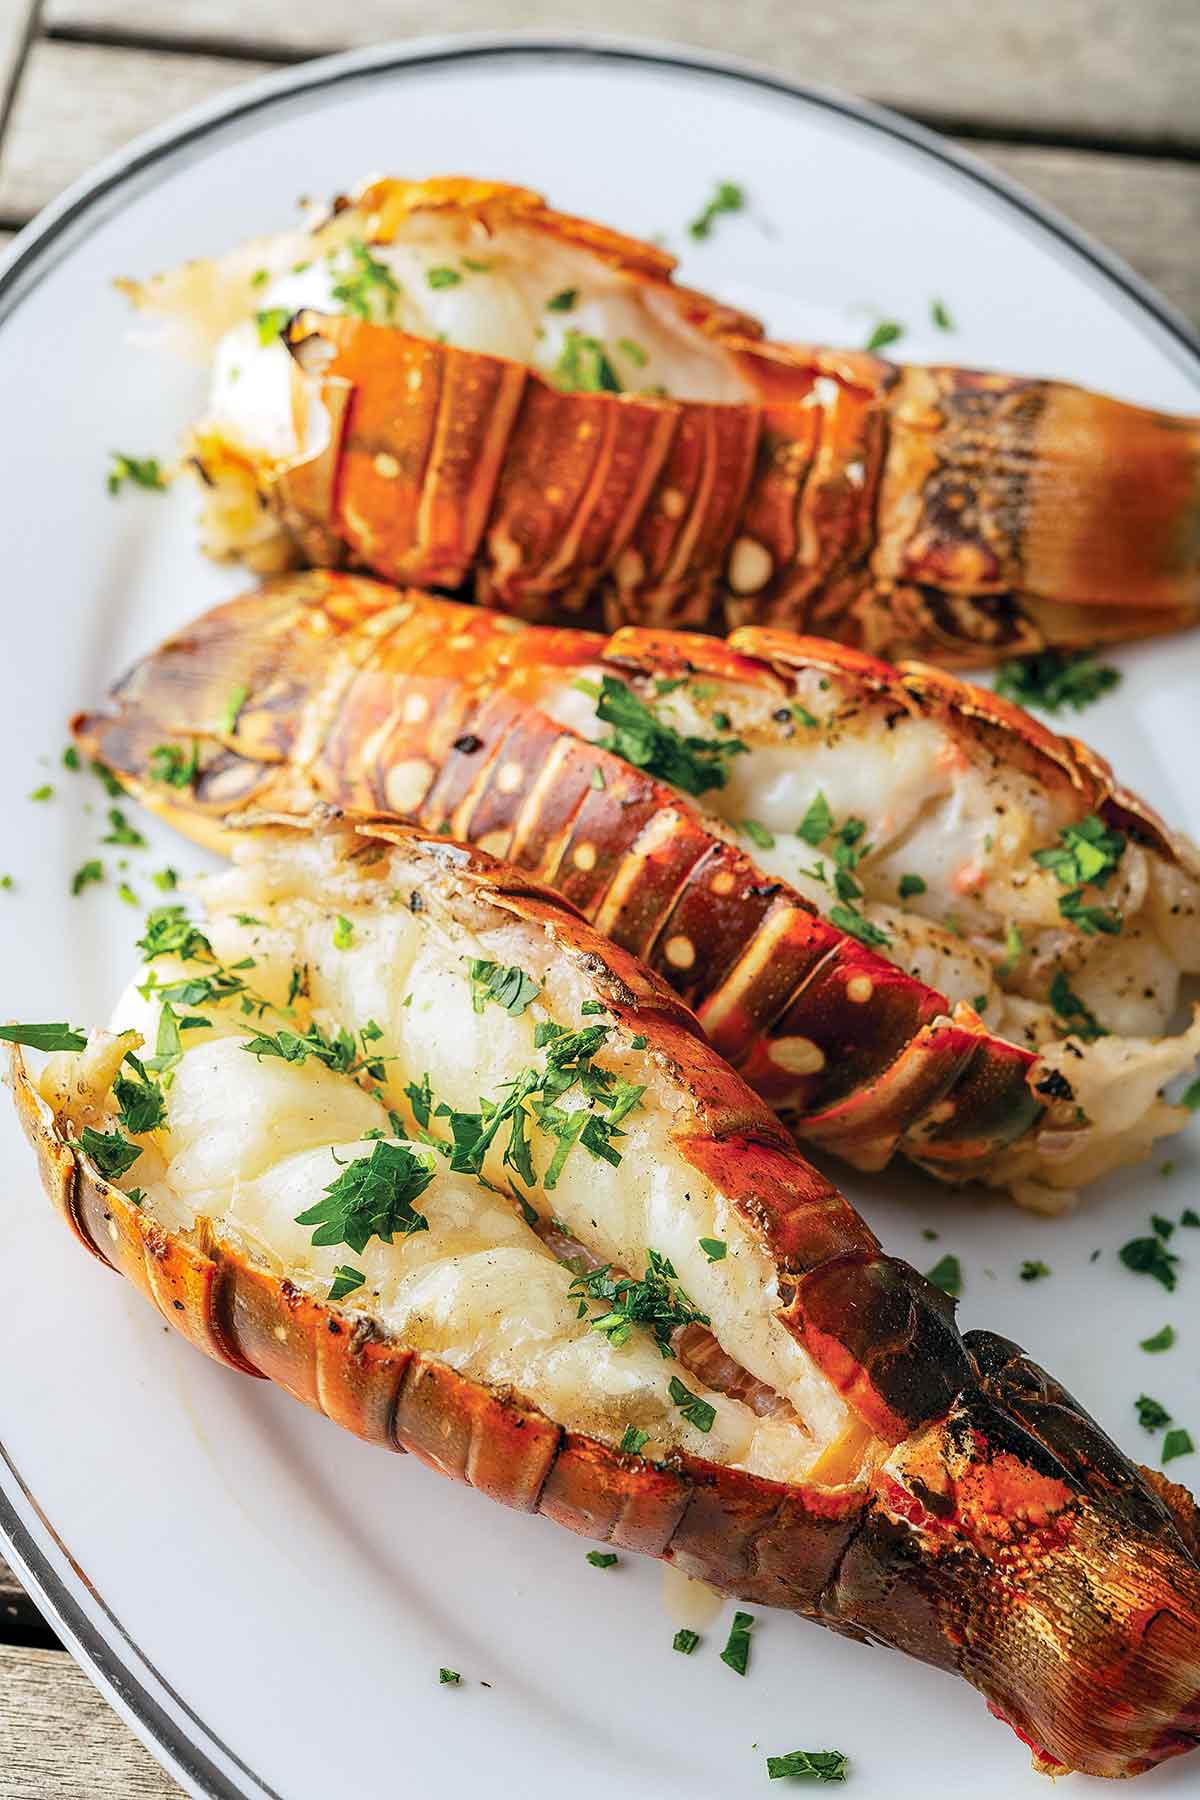 Three grilled lobster tails on an oval platter, garnished with chopped parsley.